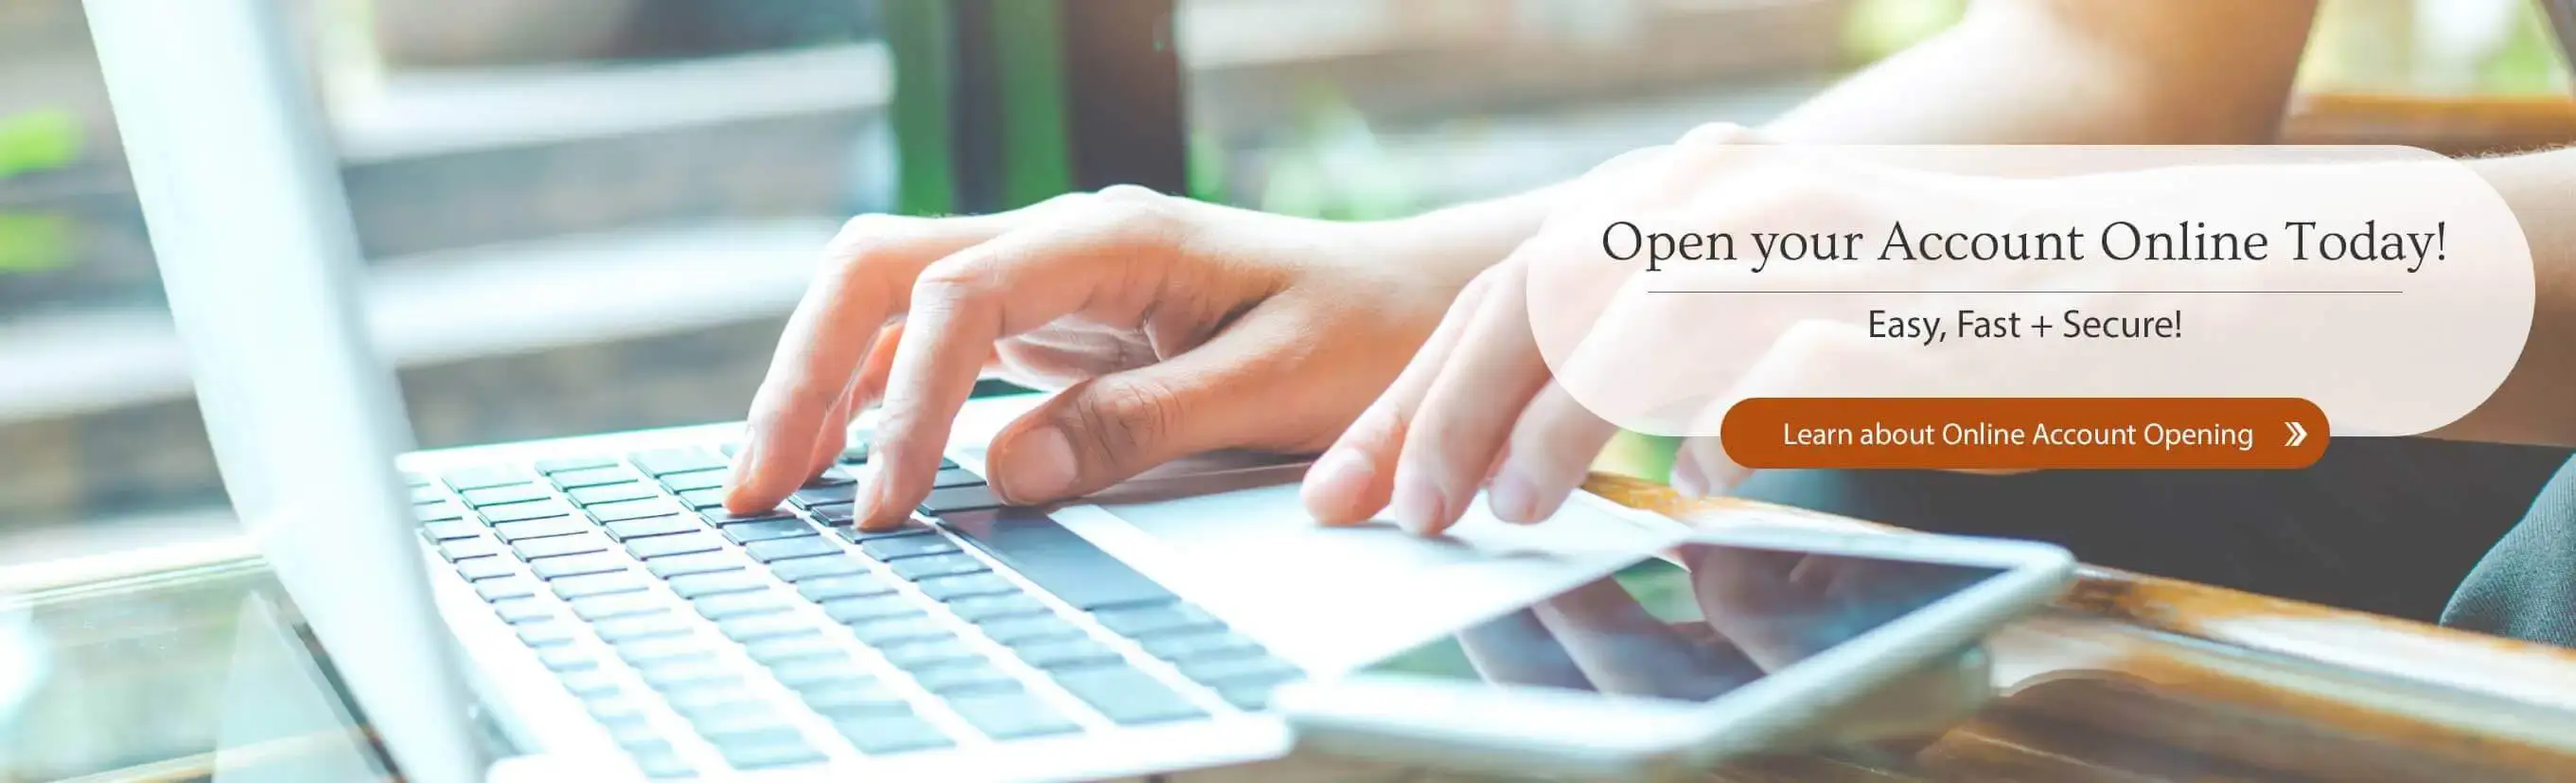 Open your account online today! easy, fast + secure! learn about online account opening